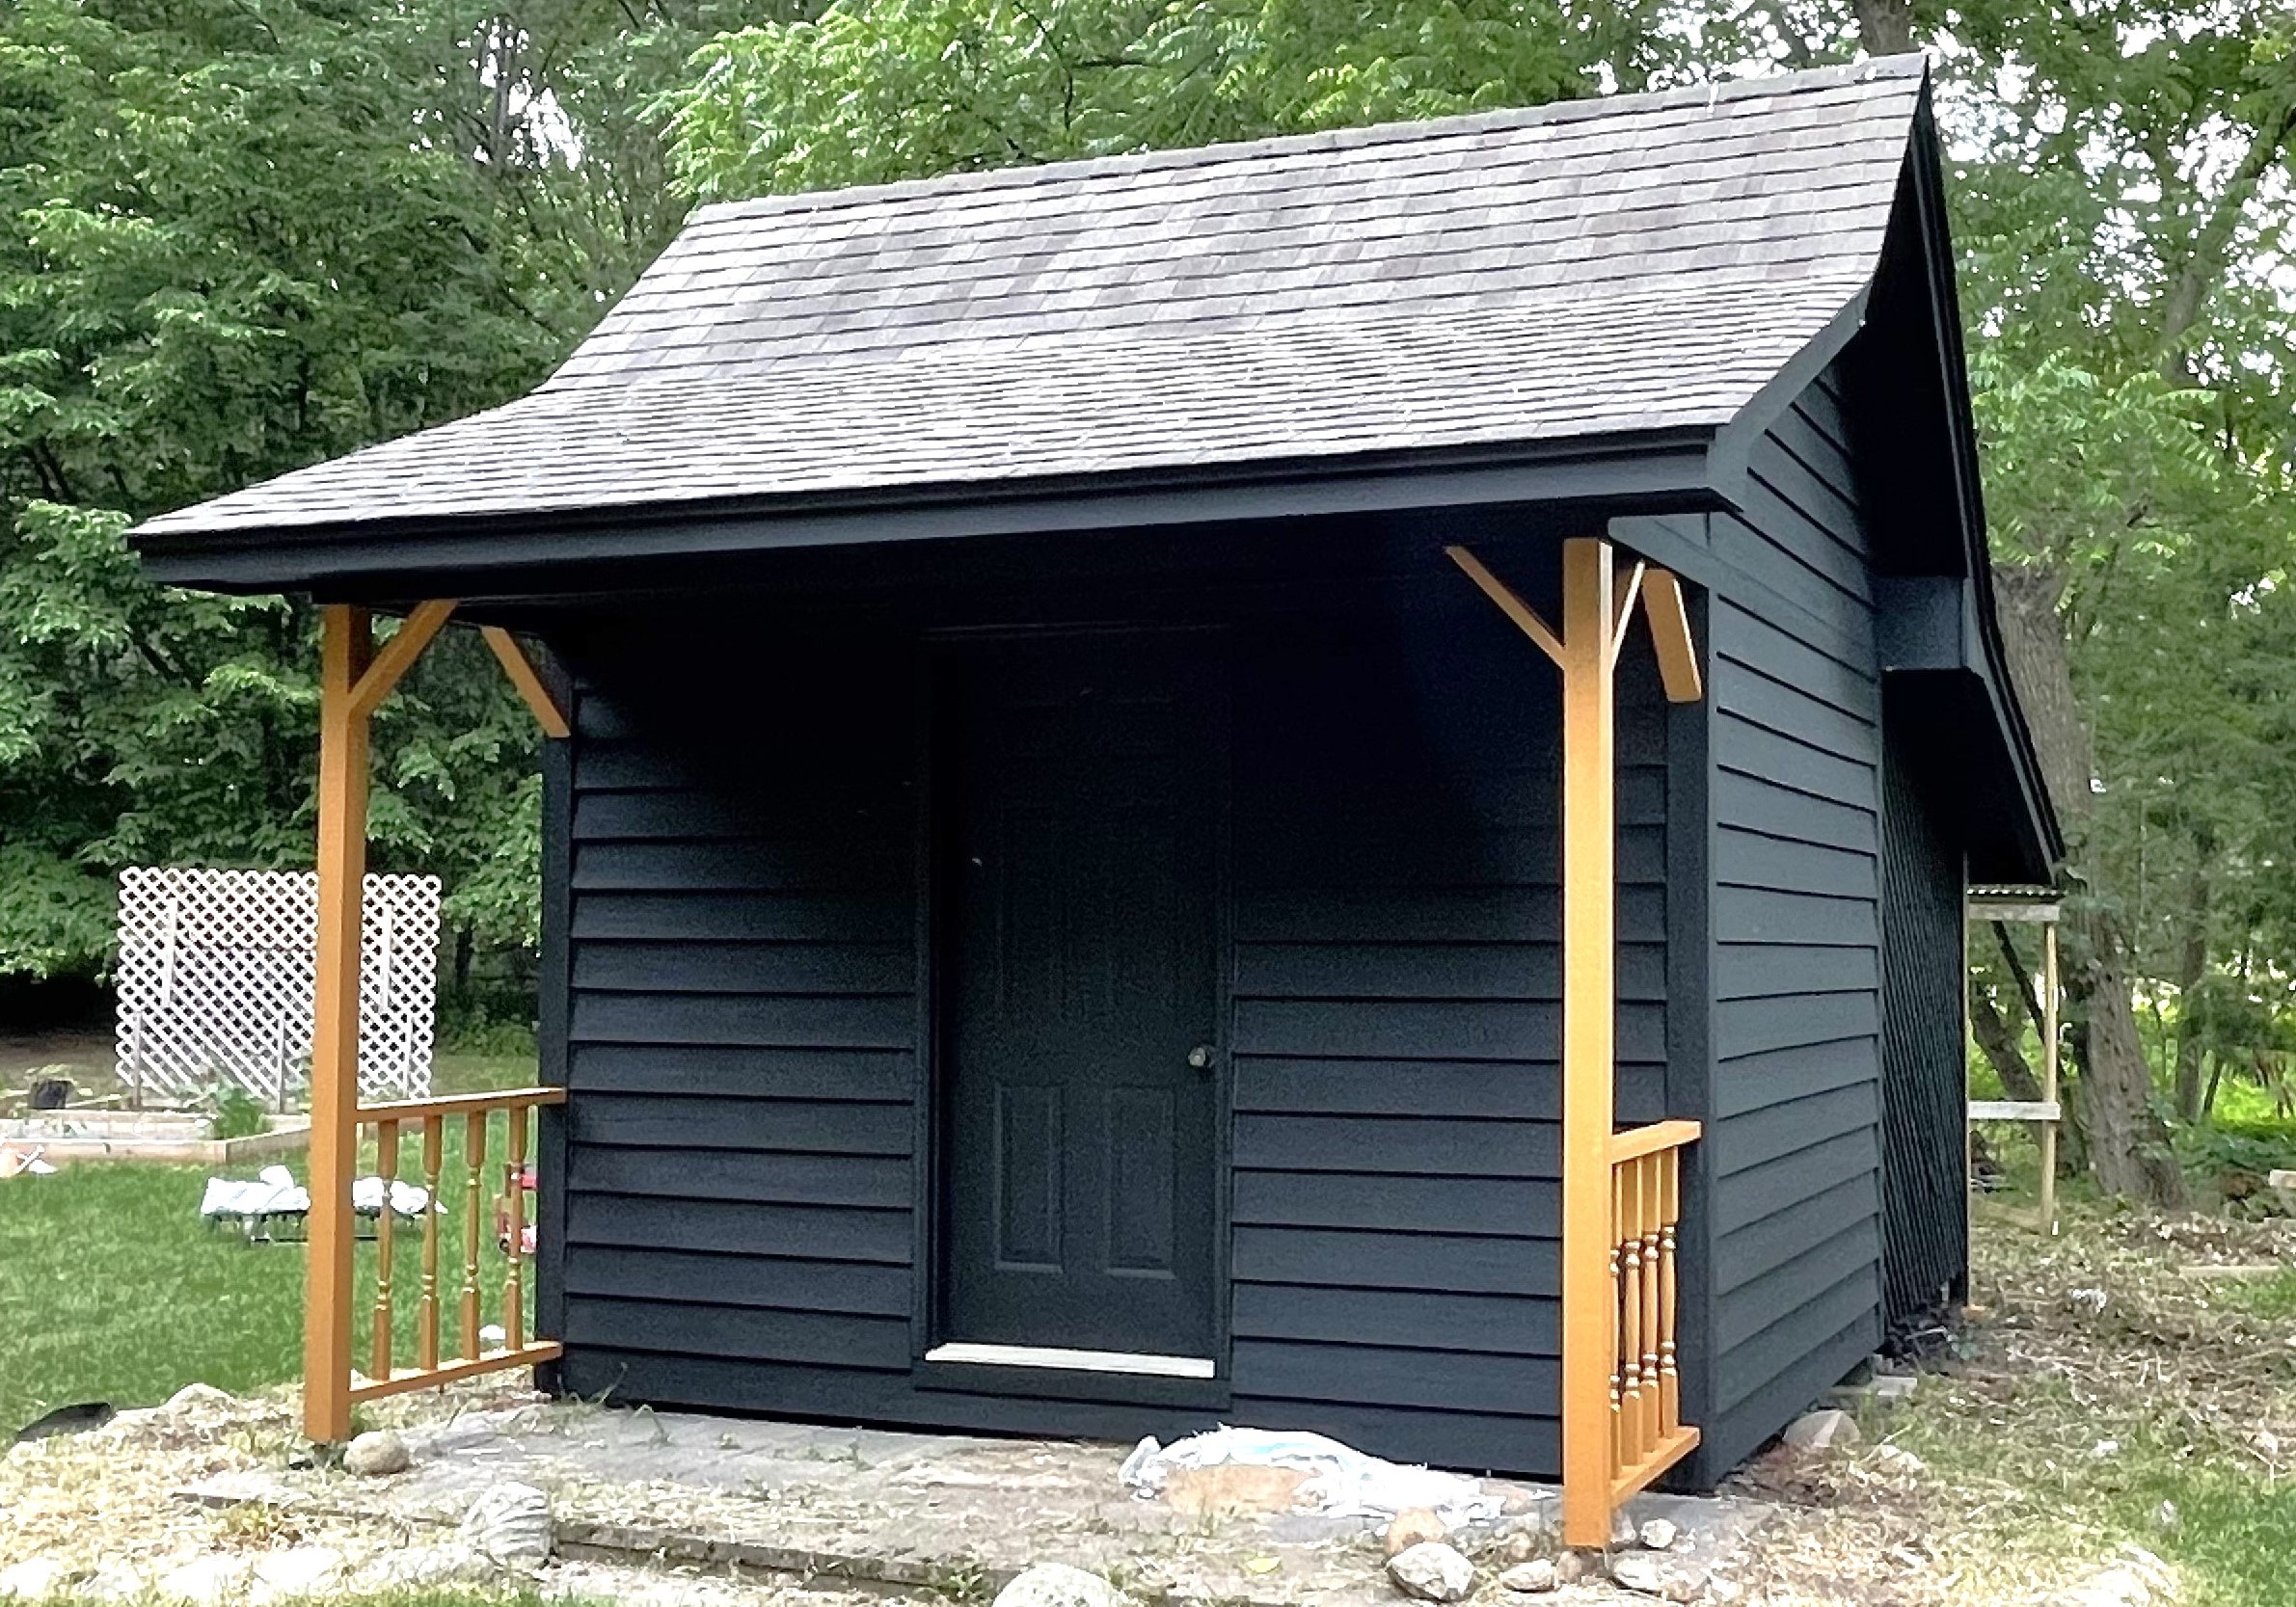 Do You Only Paint Houses? Can Sheds be Painted? Ask CertaPro!